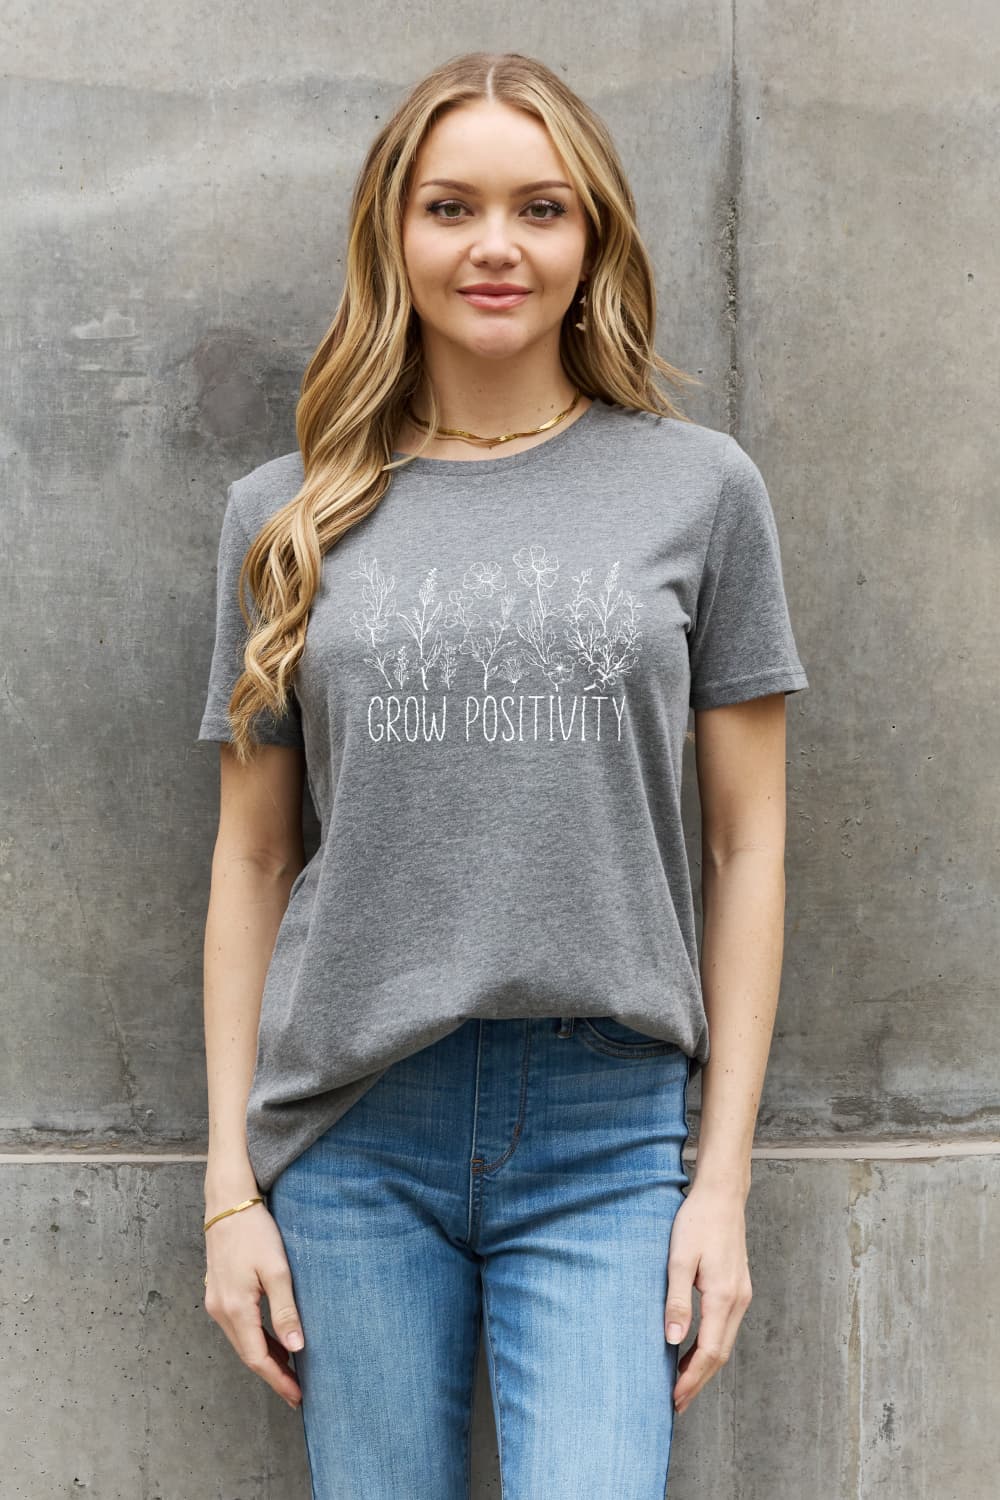 Simply Love GROW POSITIVITY Graphic Cotton Tee-TOPS / DRESSES-[Adult]-[Female]-2022 Online Blue Zone Planet